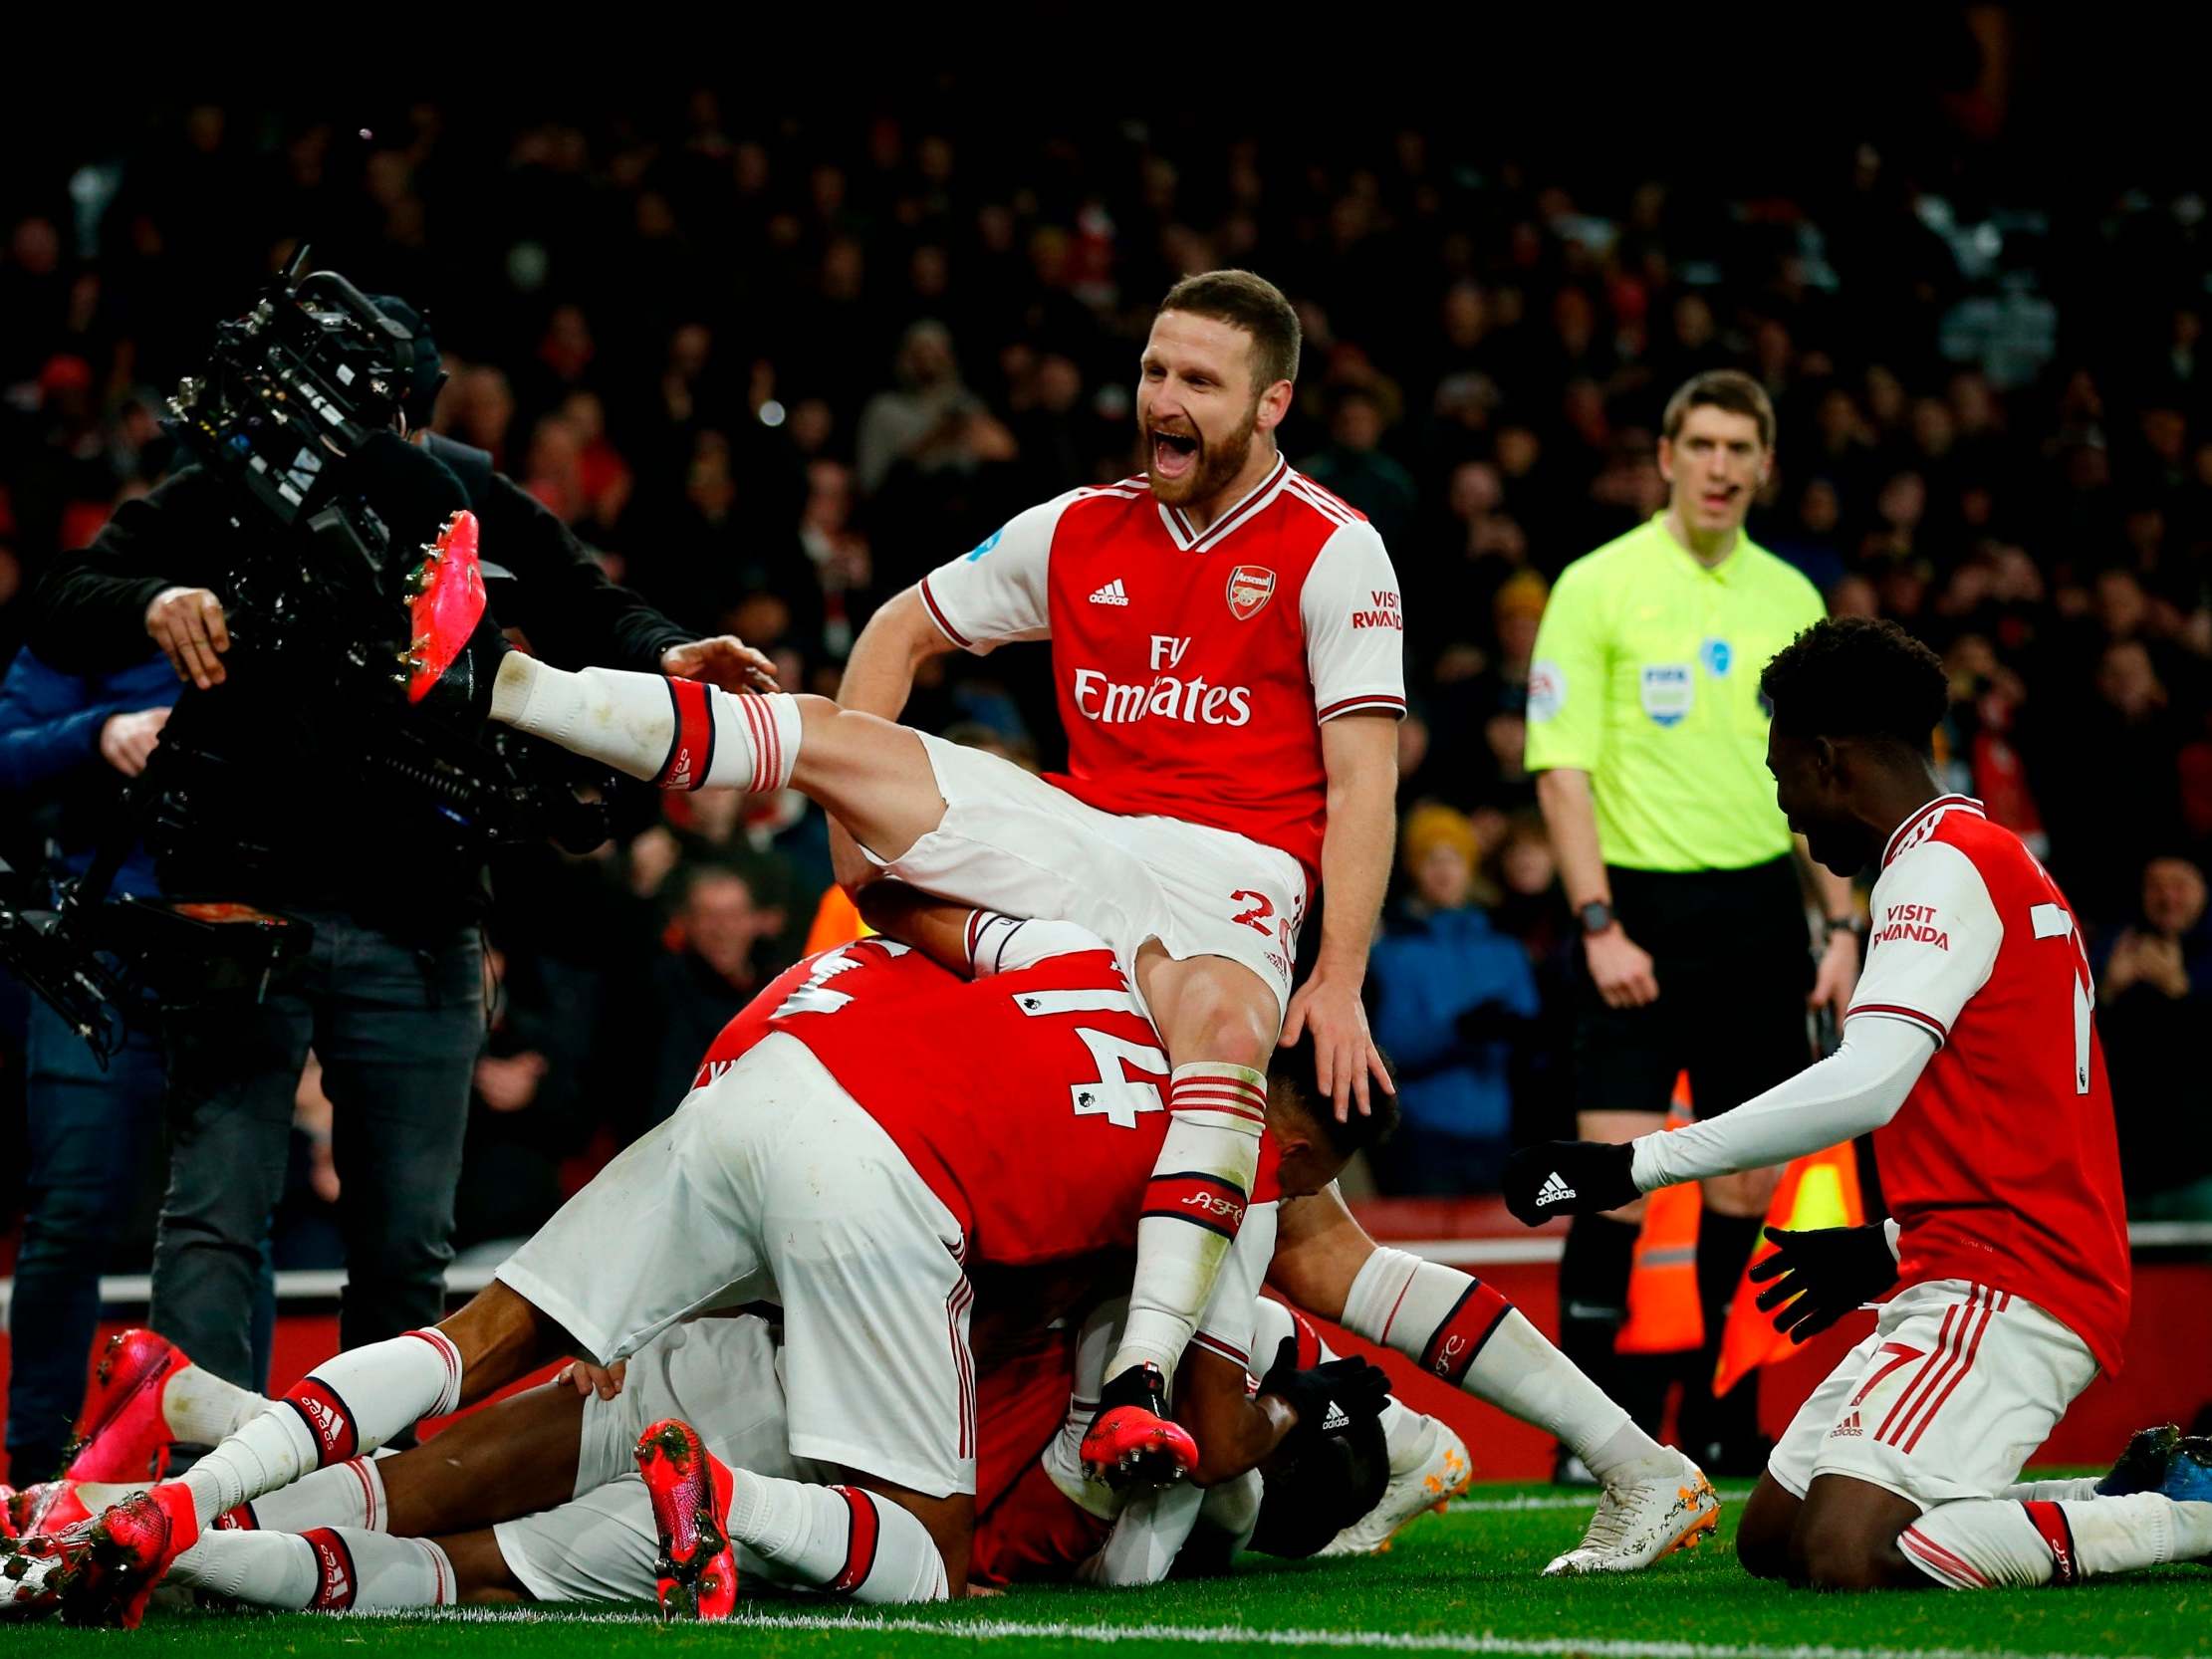 Arsenal celebrate after Lacazette adds a fourth for the Gunners